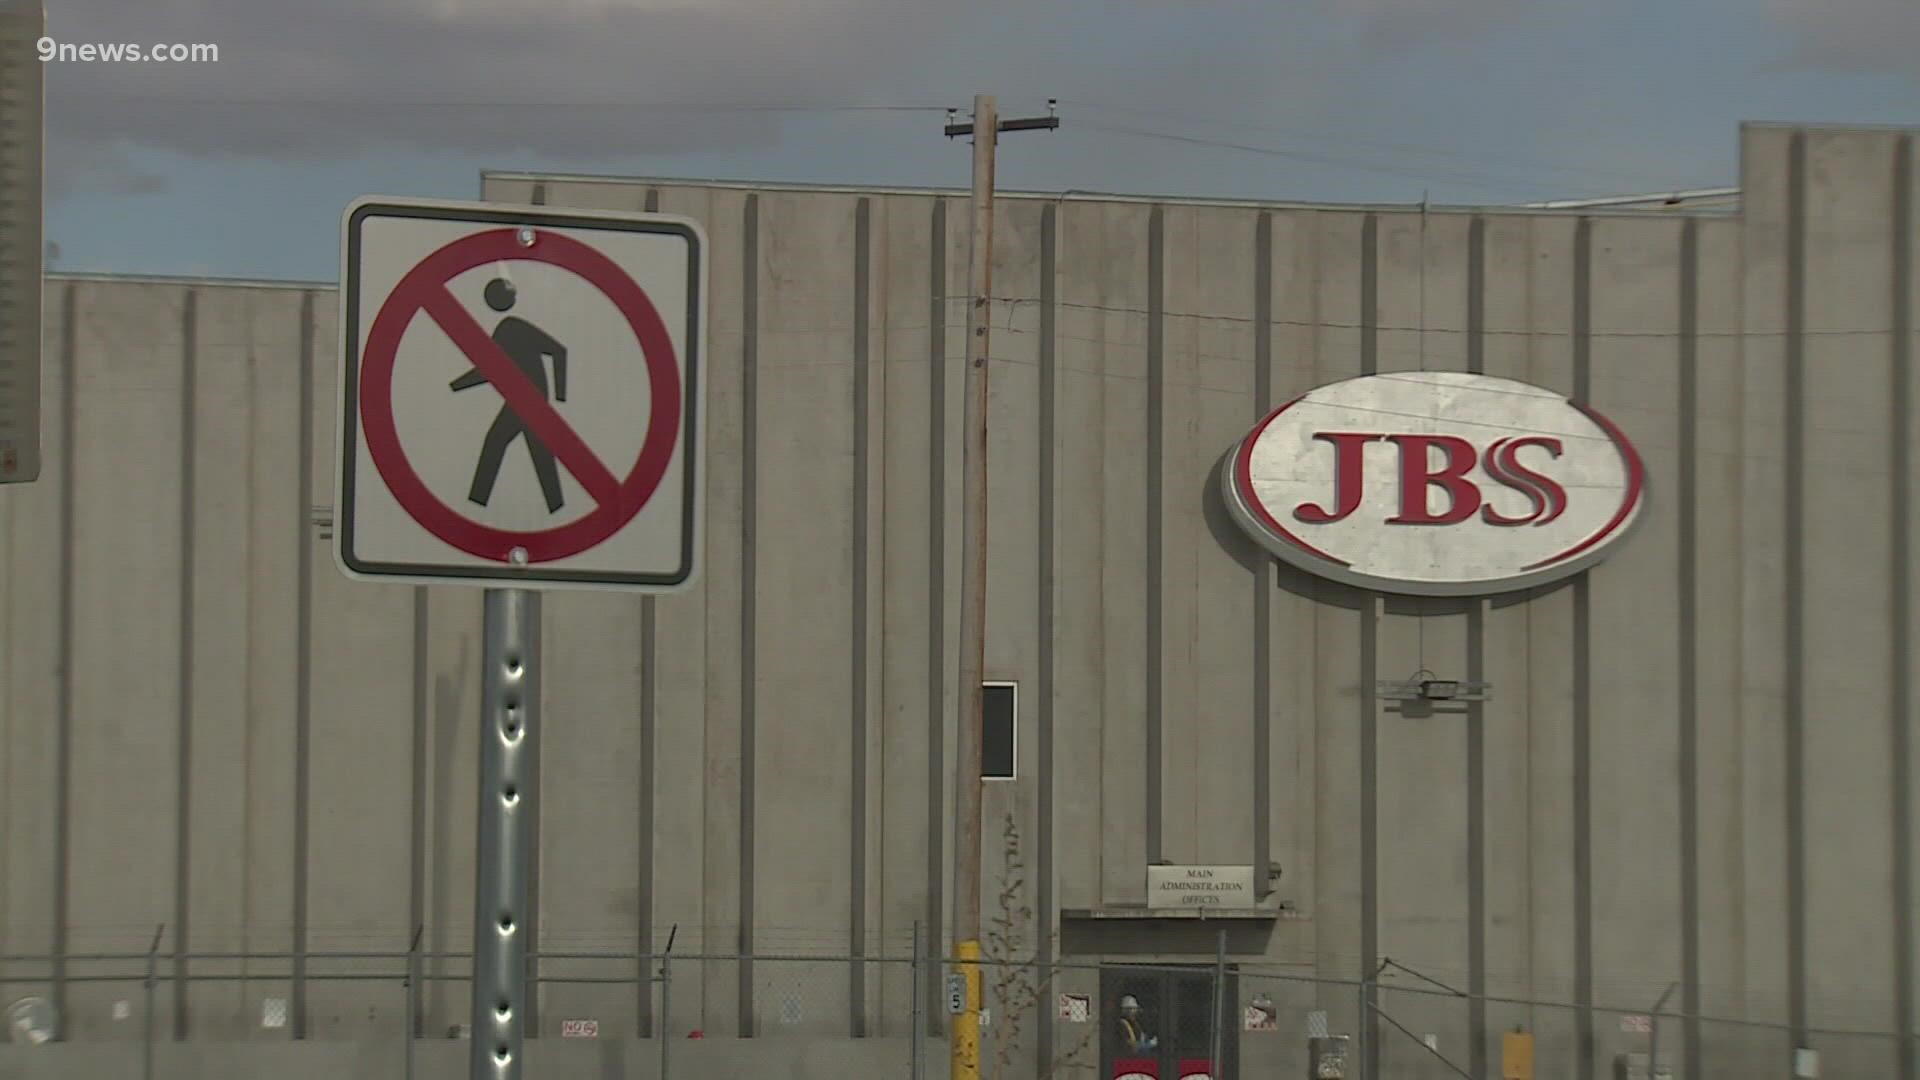 OSHA has cited JBS Foods "for repeated safety failures" after a worker died at its Greeley meatpacking plant in March.